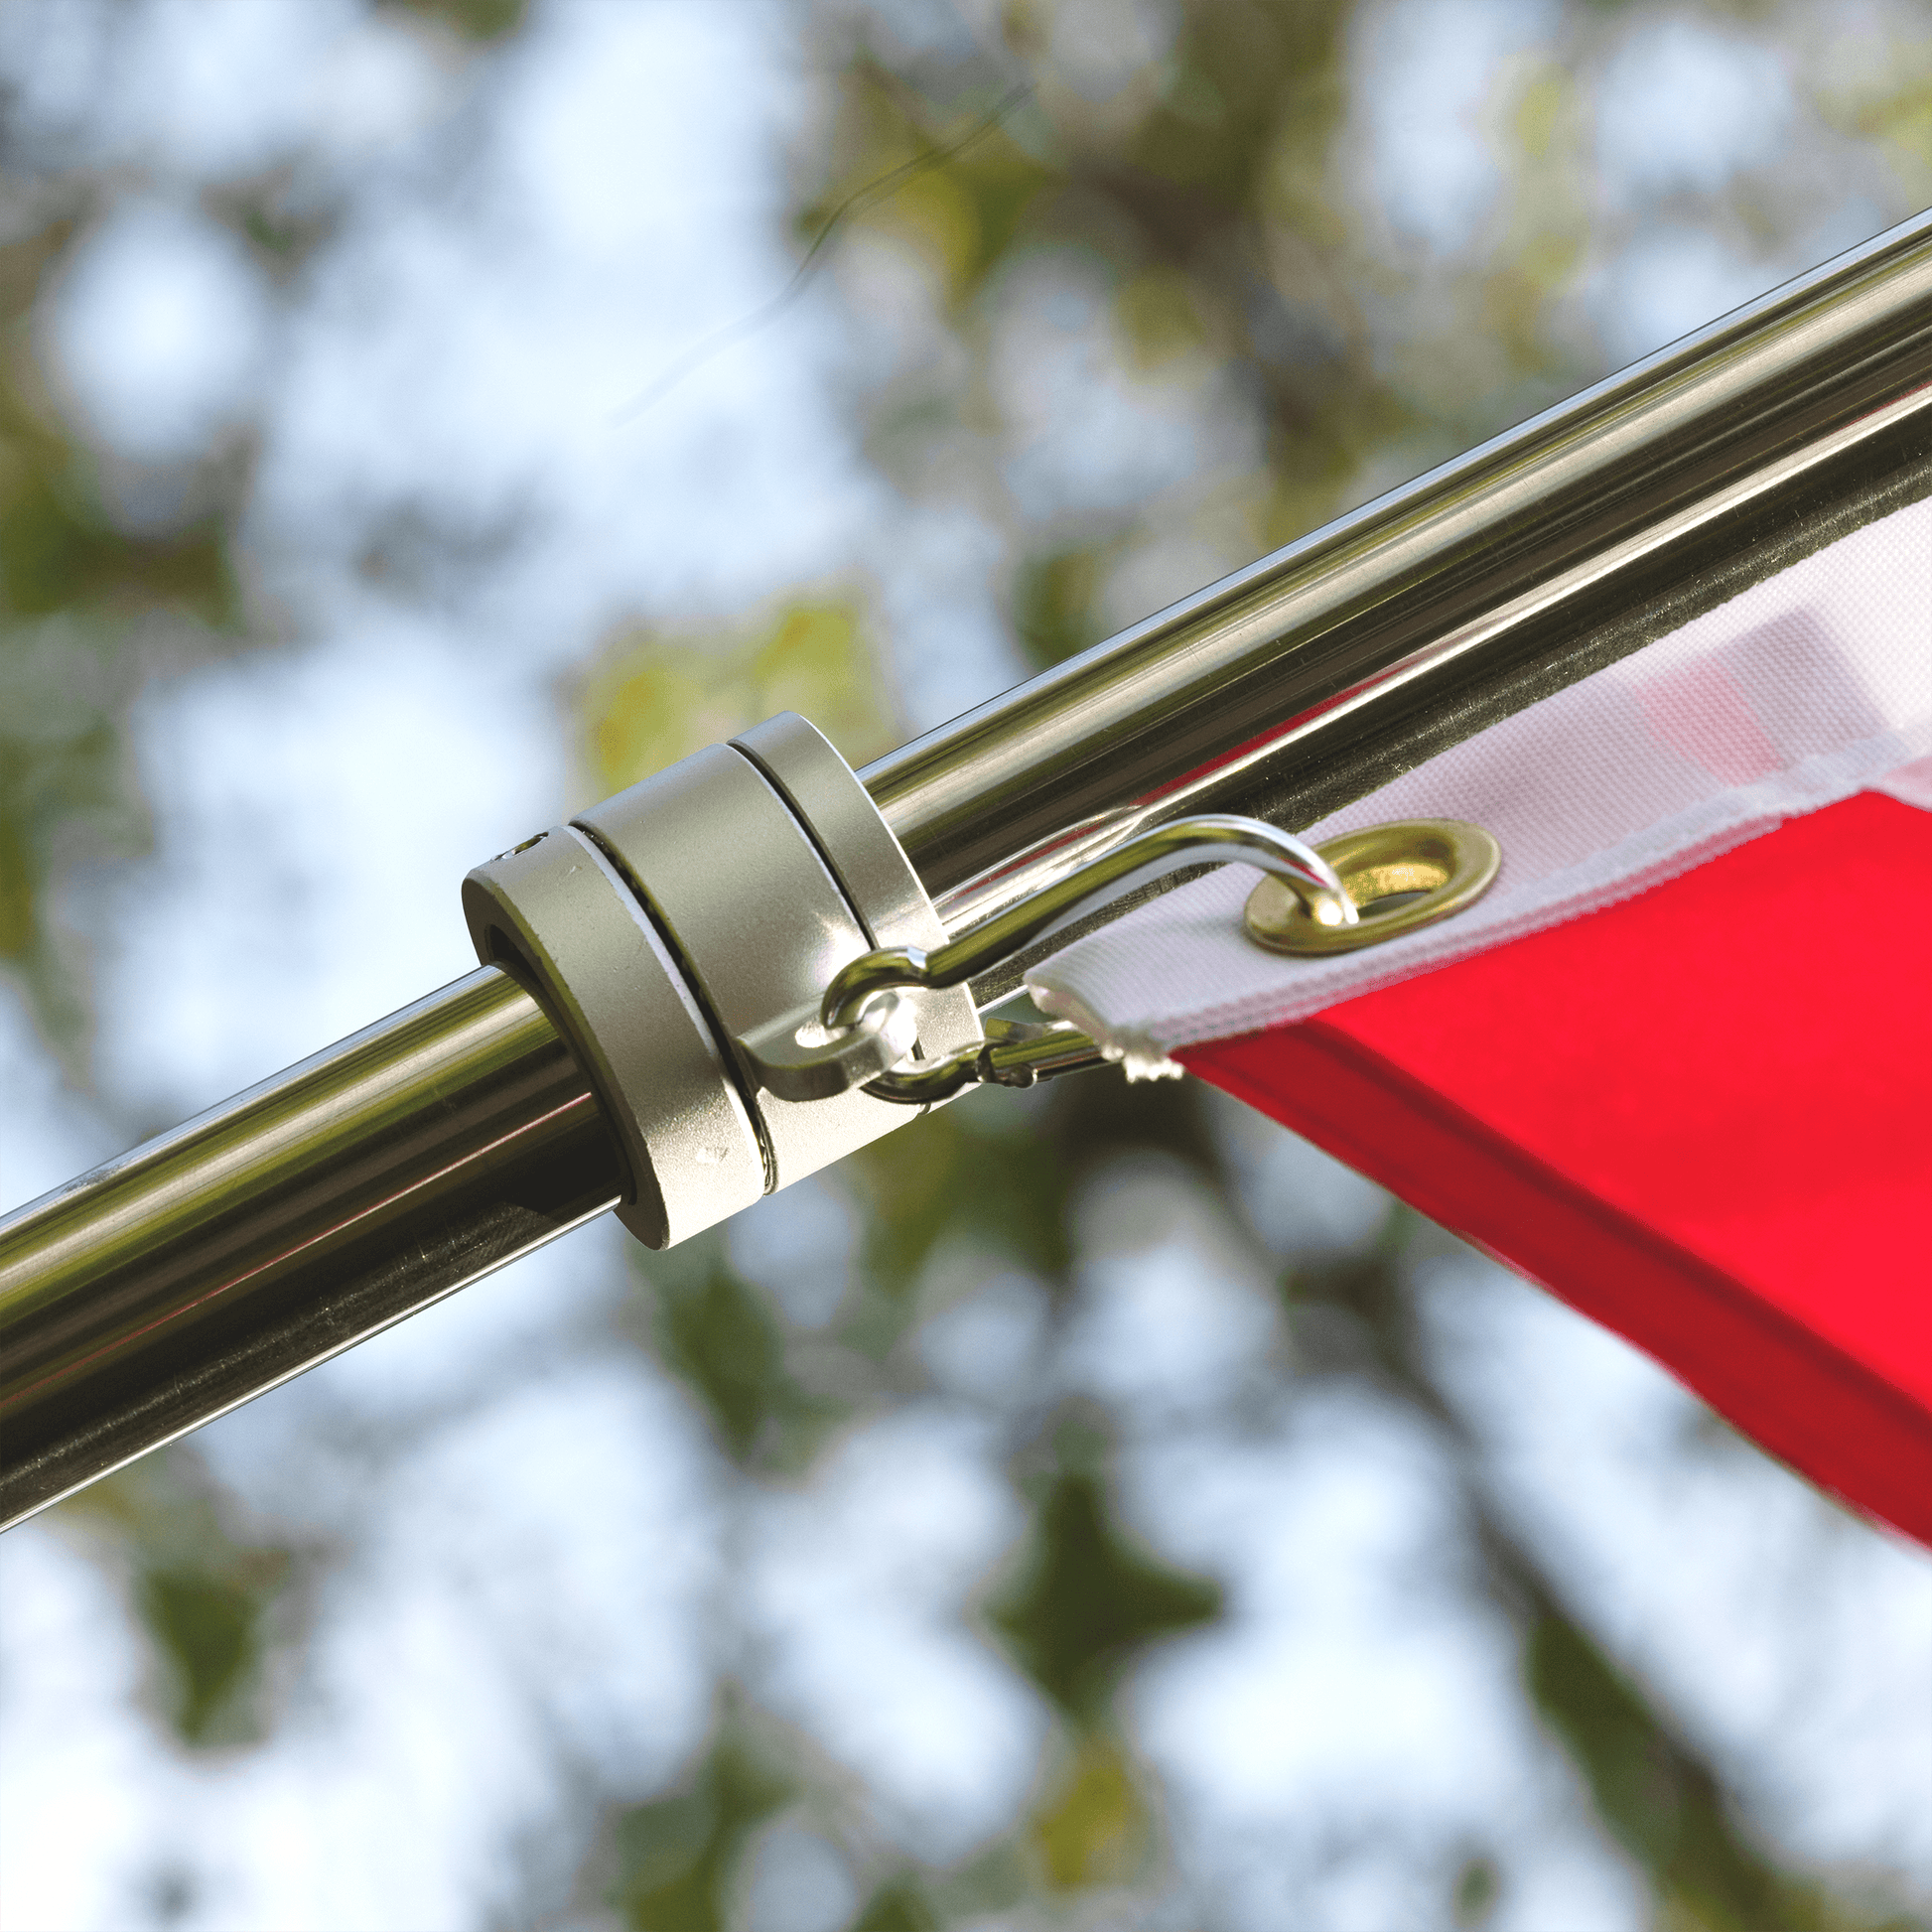 Close-up of a flagpole attachment holding a red and white flag, with a blurred background of tree branches and sky. The 6 FT ALUMINUM FLAG POLE WITH TANGLE FREE SPINNERS by The FlagStars features tangle-free spinners for easy installation.